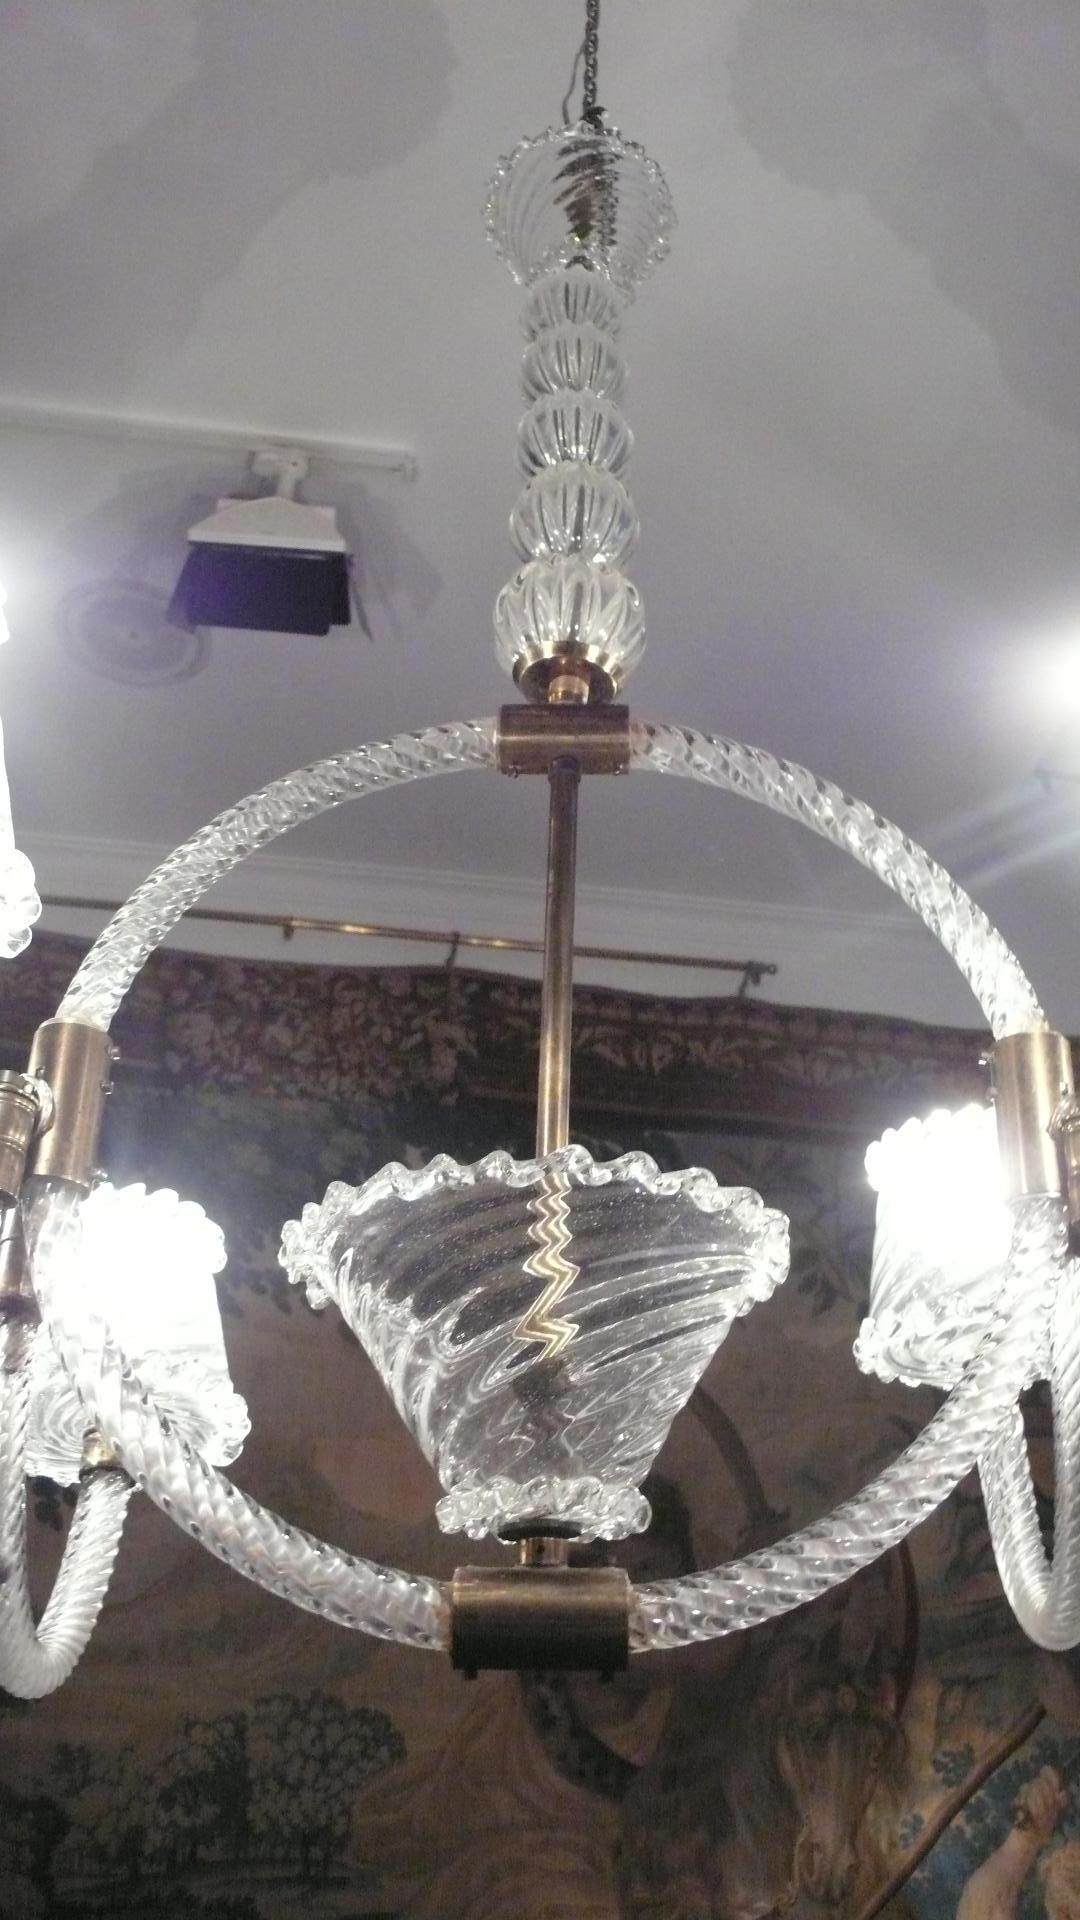 Majestic Liberty Chandelier by Ercole Barovier, Murano, 1940s For Sale 12